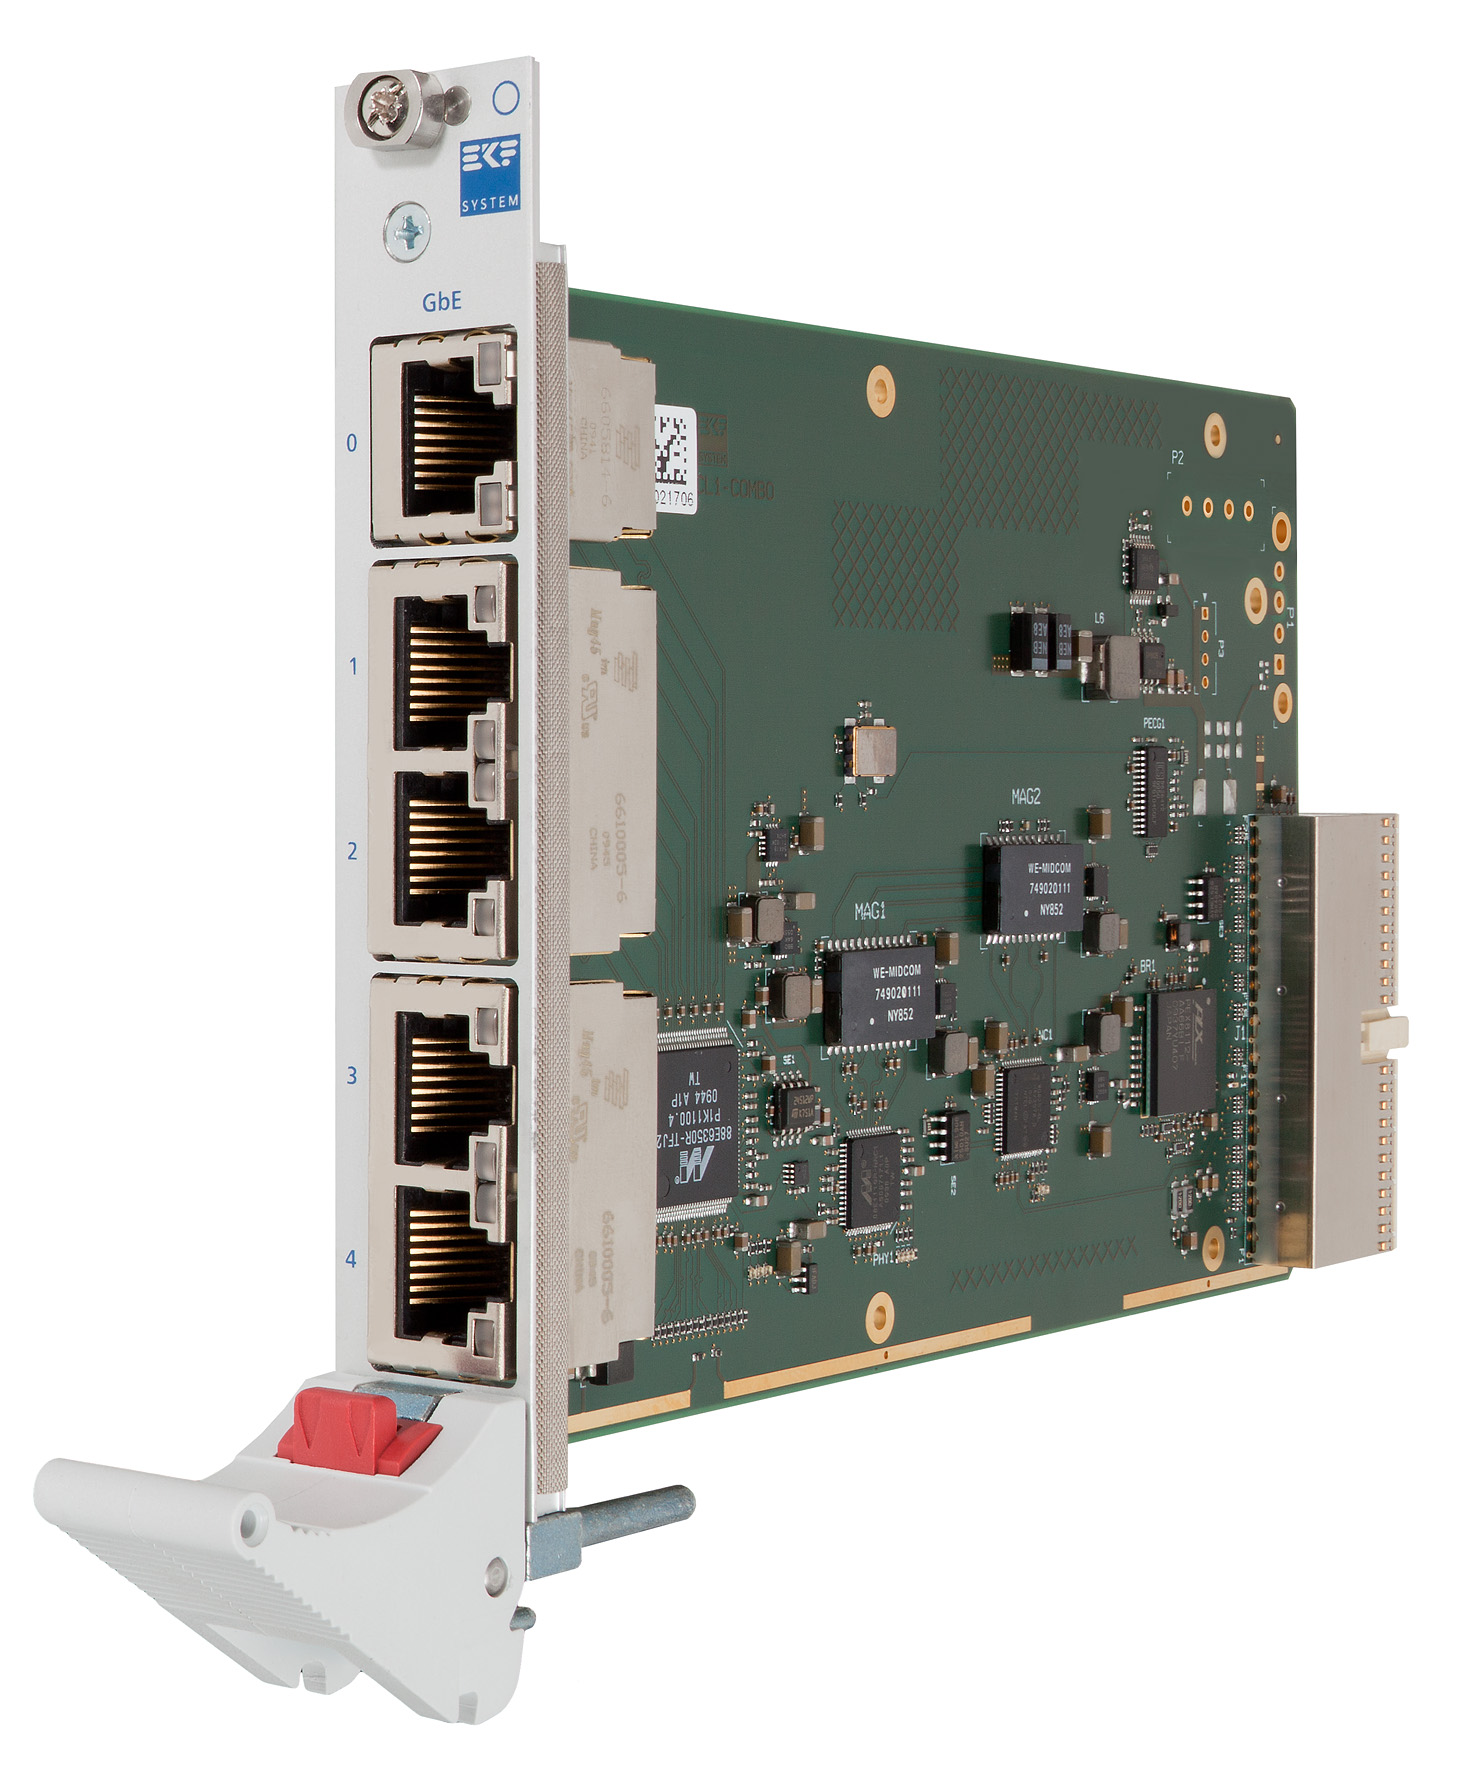 CL1-COMBO - 3U Compact PCI Ethernet Switch